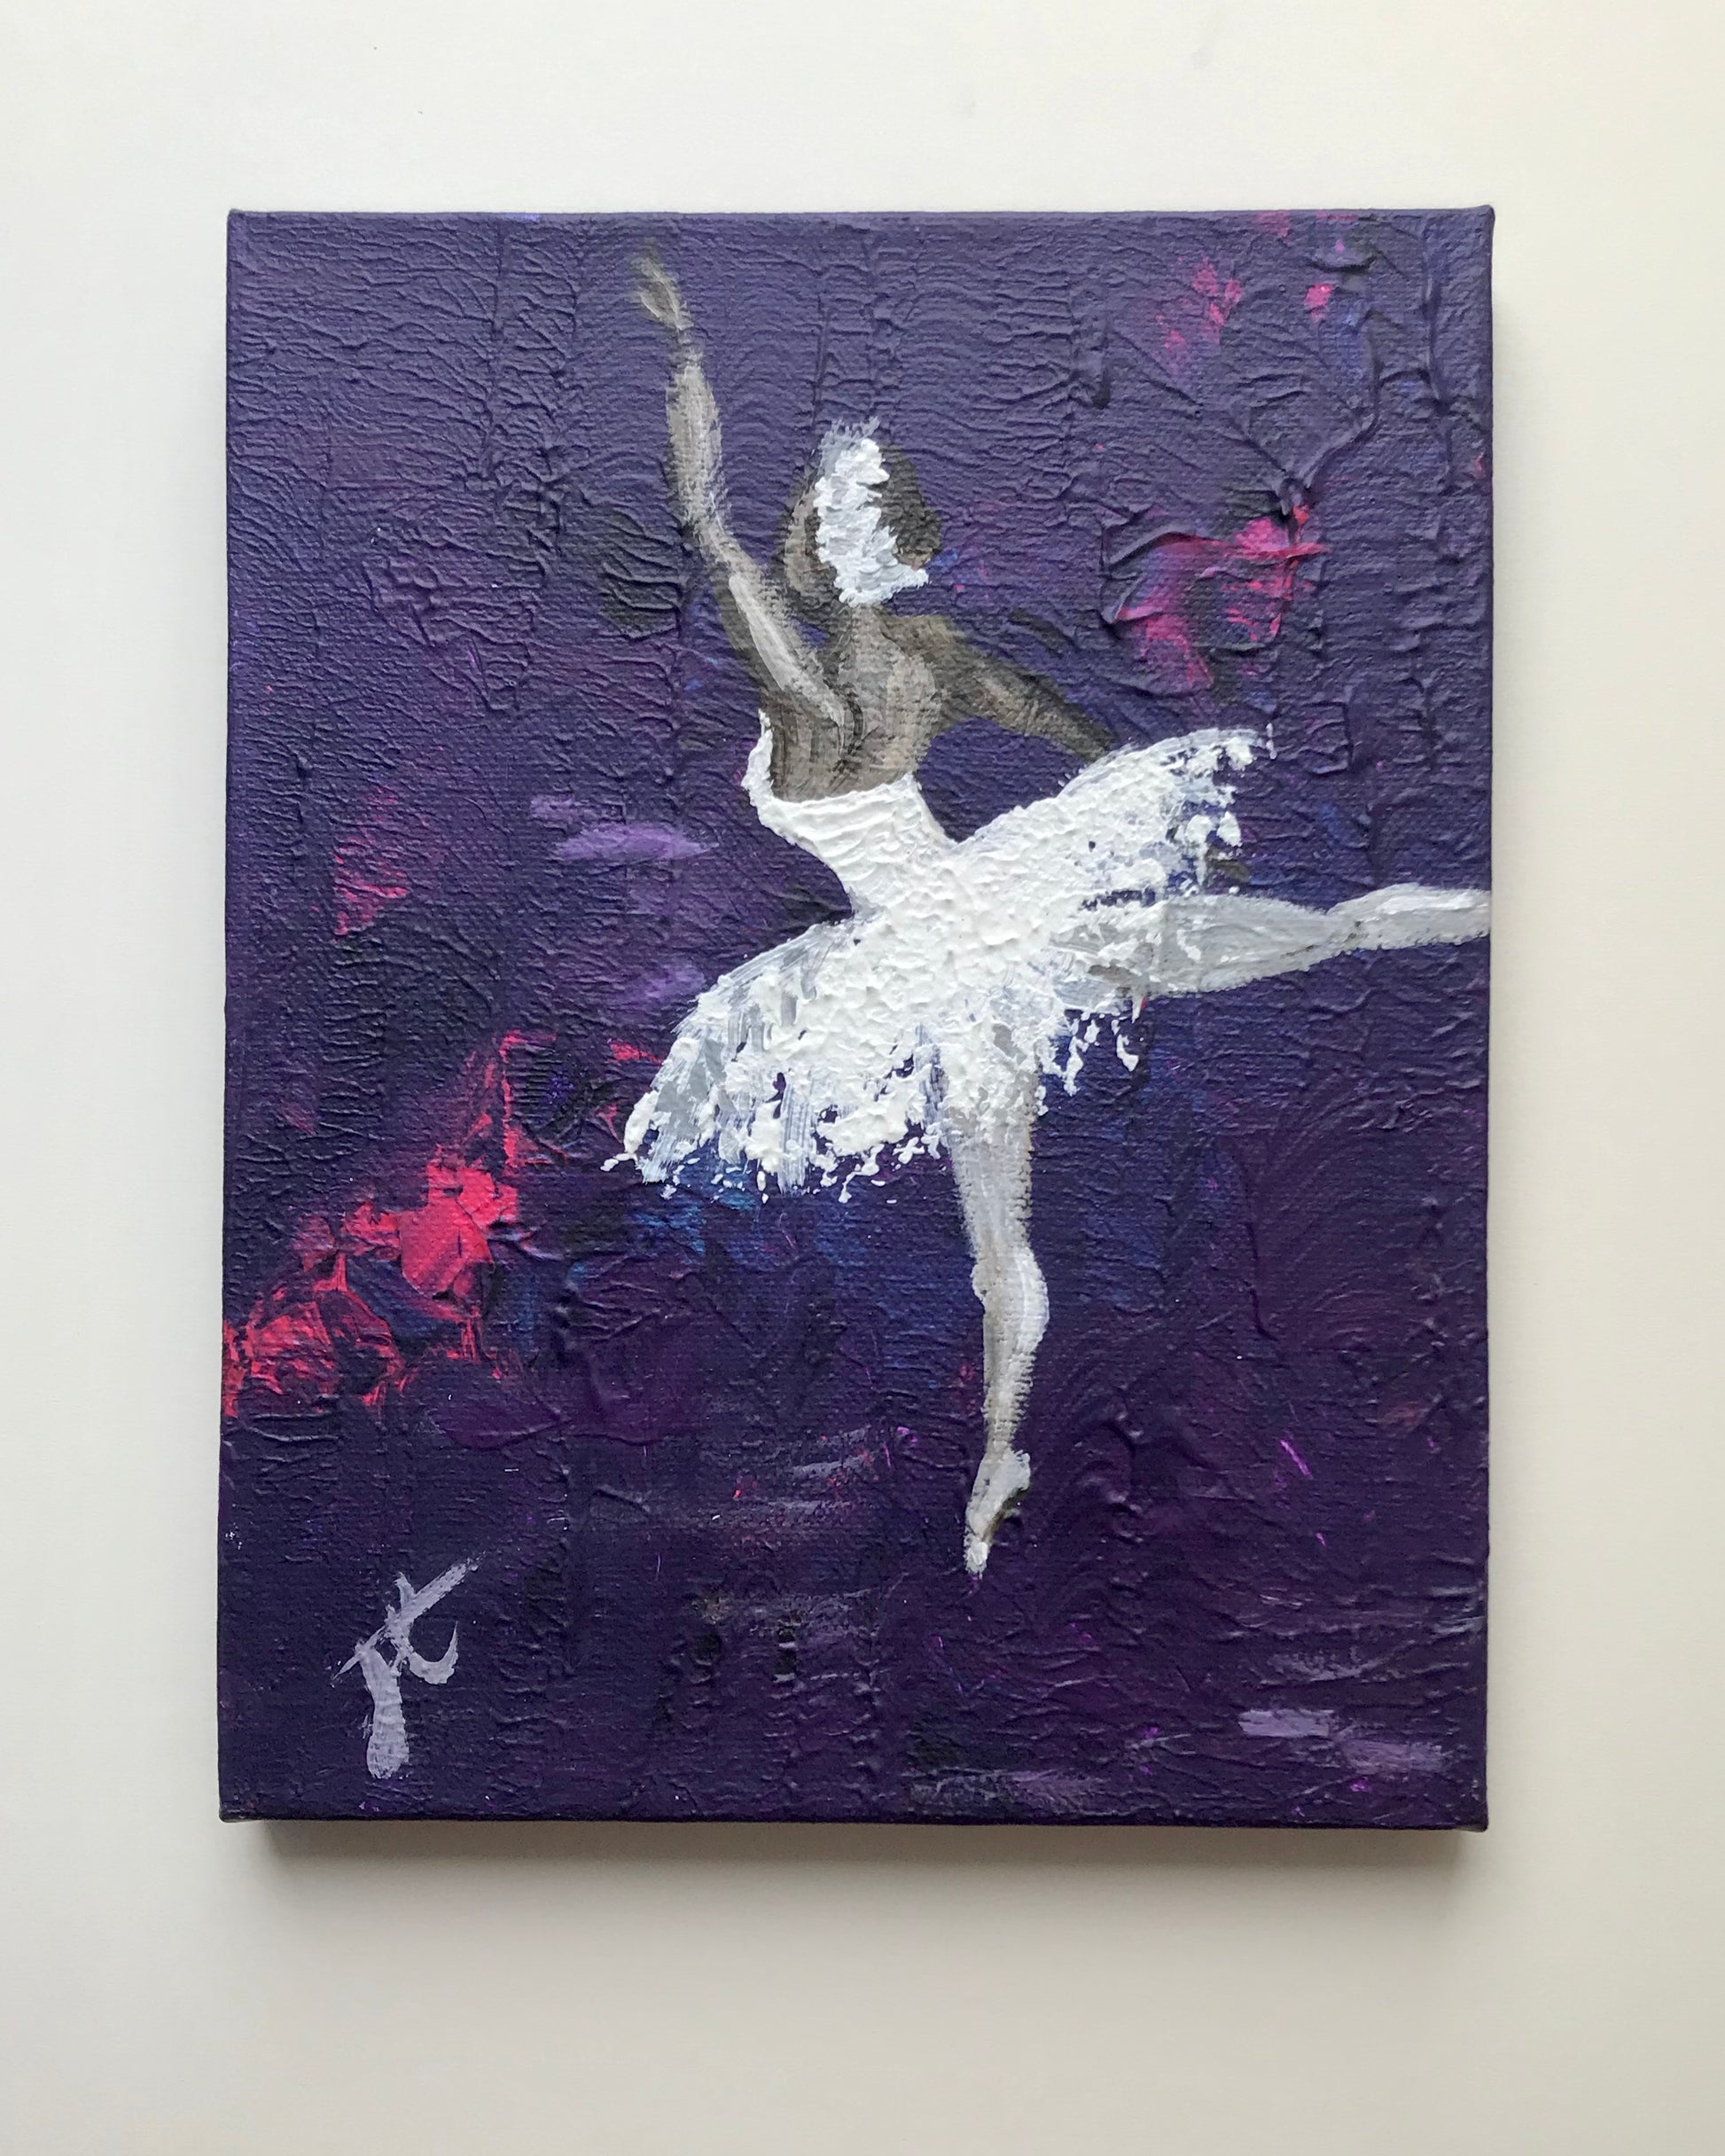 Painting shown against light background: a ballerina in swan costume poised stepping away from the viewer. She is shown against a purple and neon pink textured background.